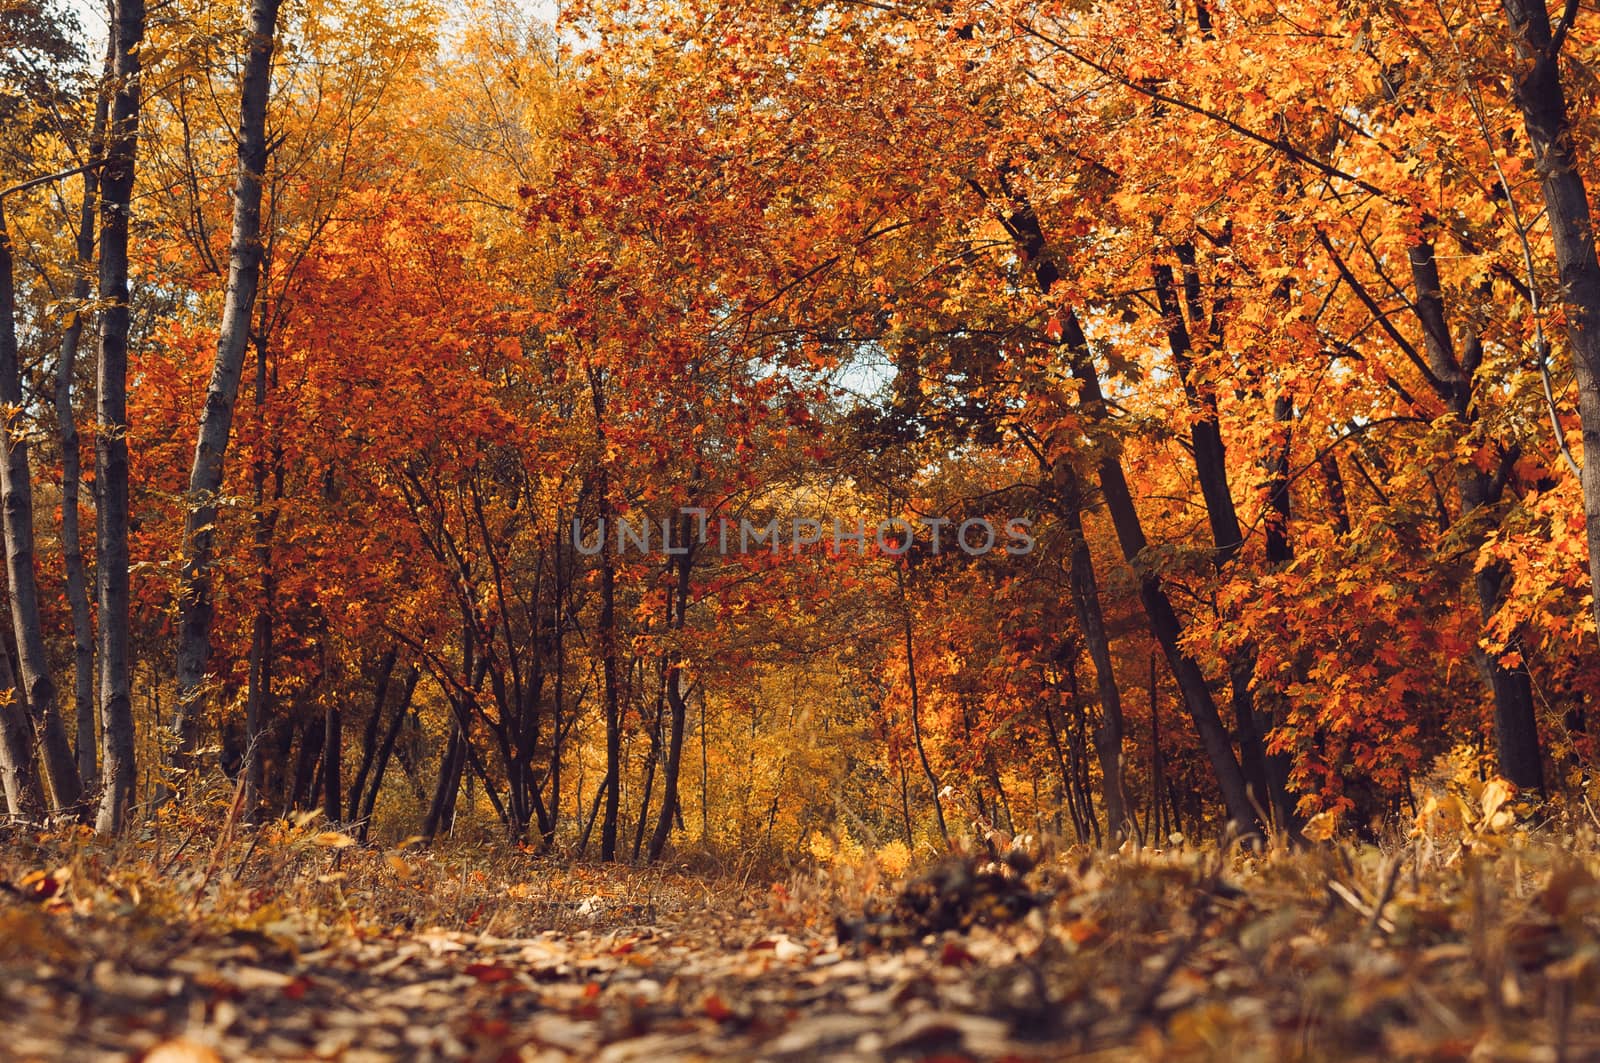 Autumn sunny landscape. Road to yellow forest. Autumn park of trees and fallen autumn leaves on the ground in the park on a sunny October day.template for design.